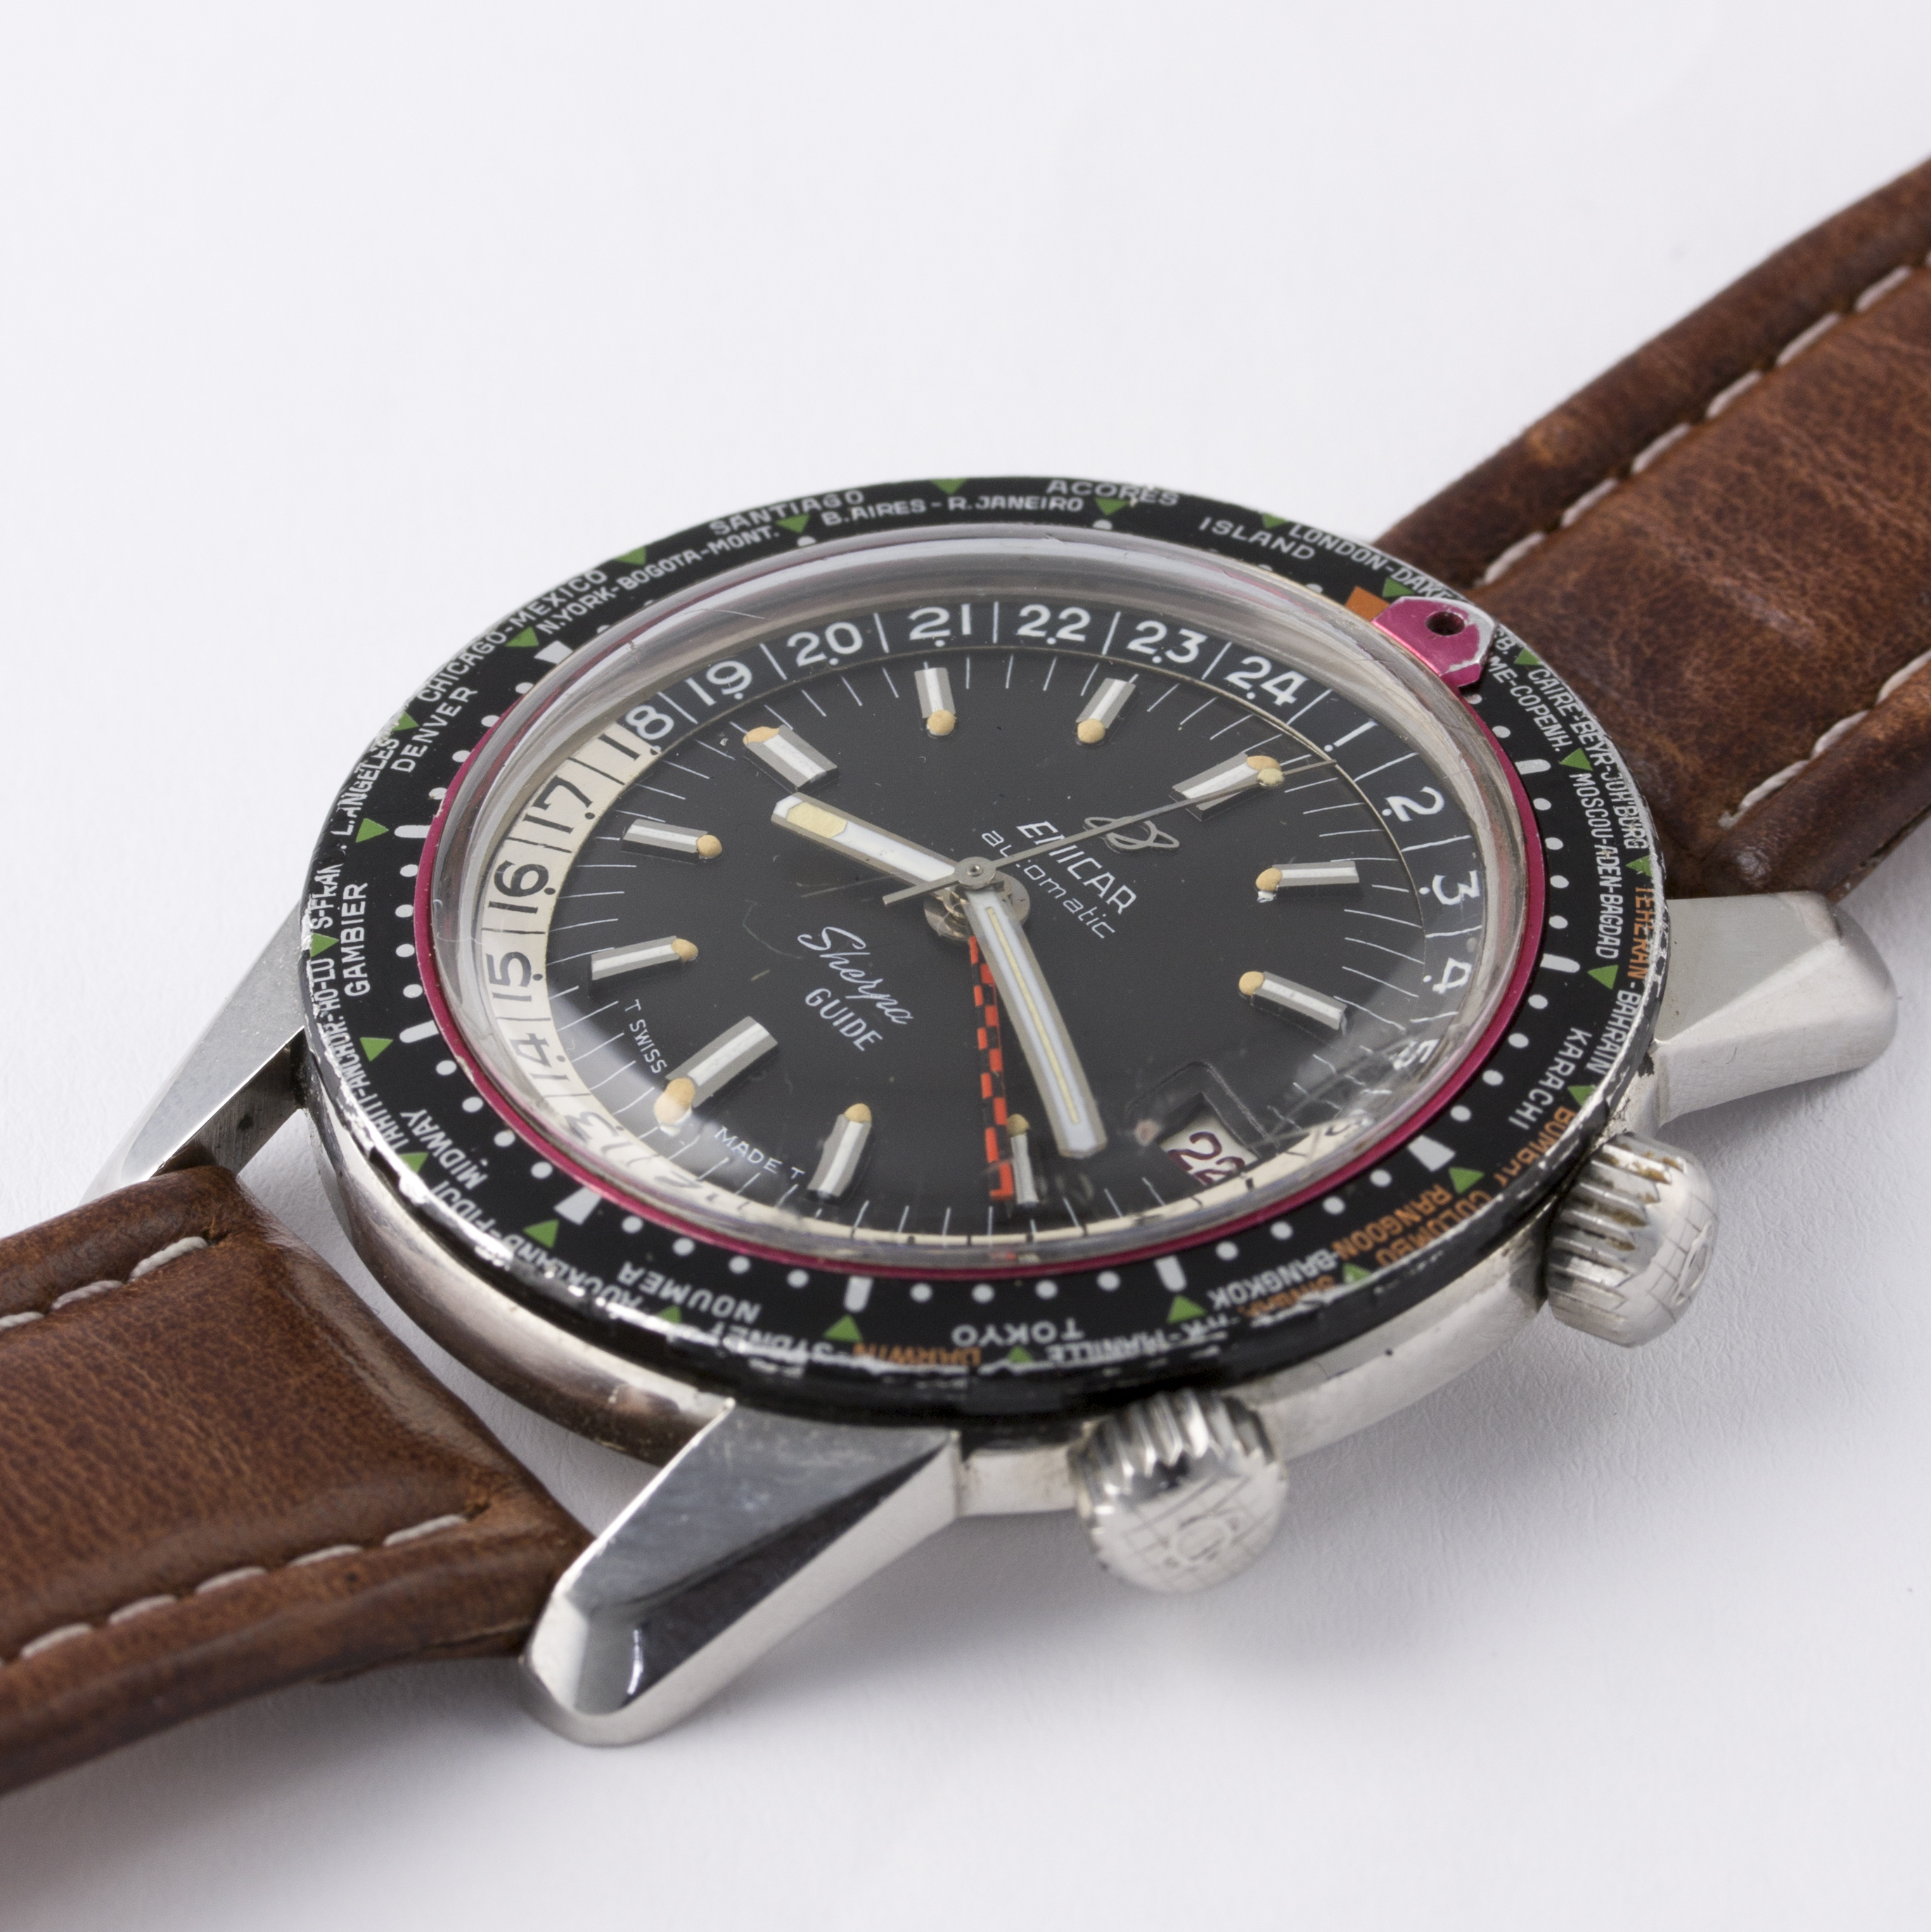 A GENTLEMAN’S STAINLESS STEEL ENICAR SHERPA GUIDE 600 GMT AUTOMATIC WRIST WATCH
CIRCA 1960s, REF. 14 - Image 3 of 6